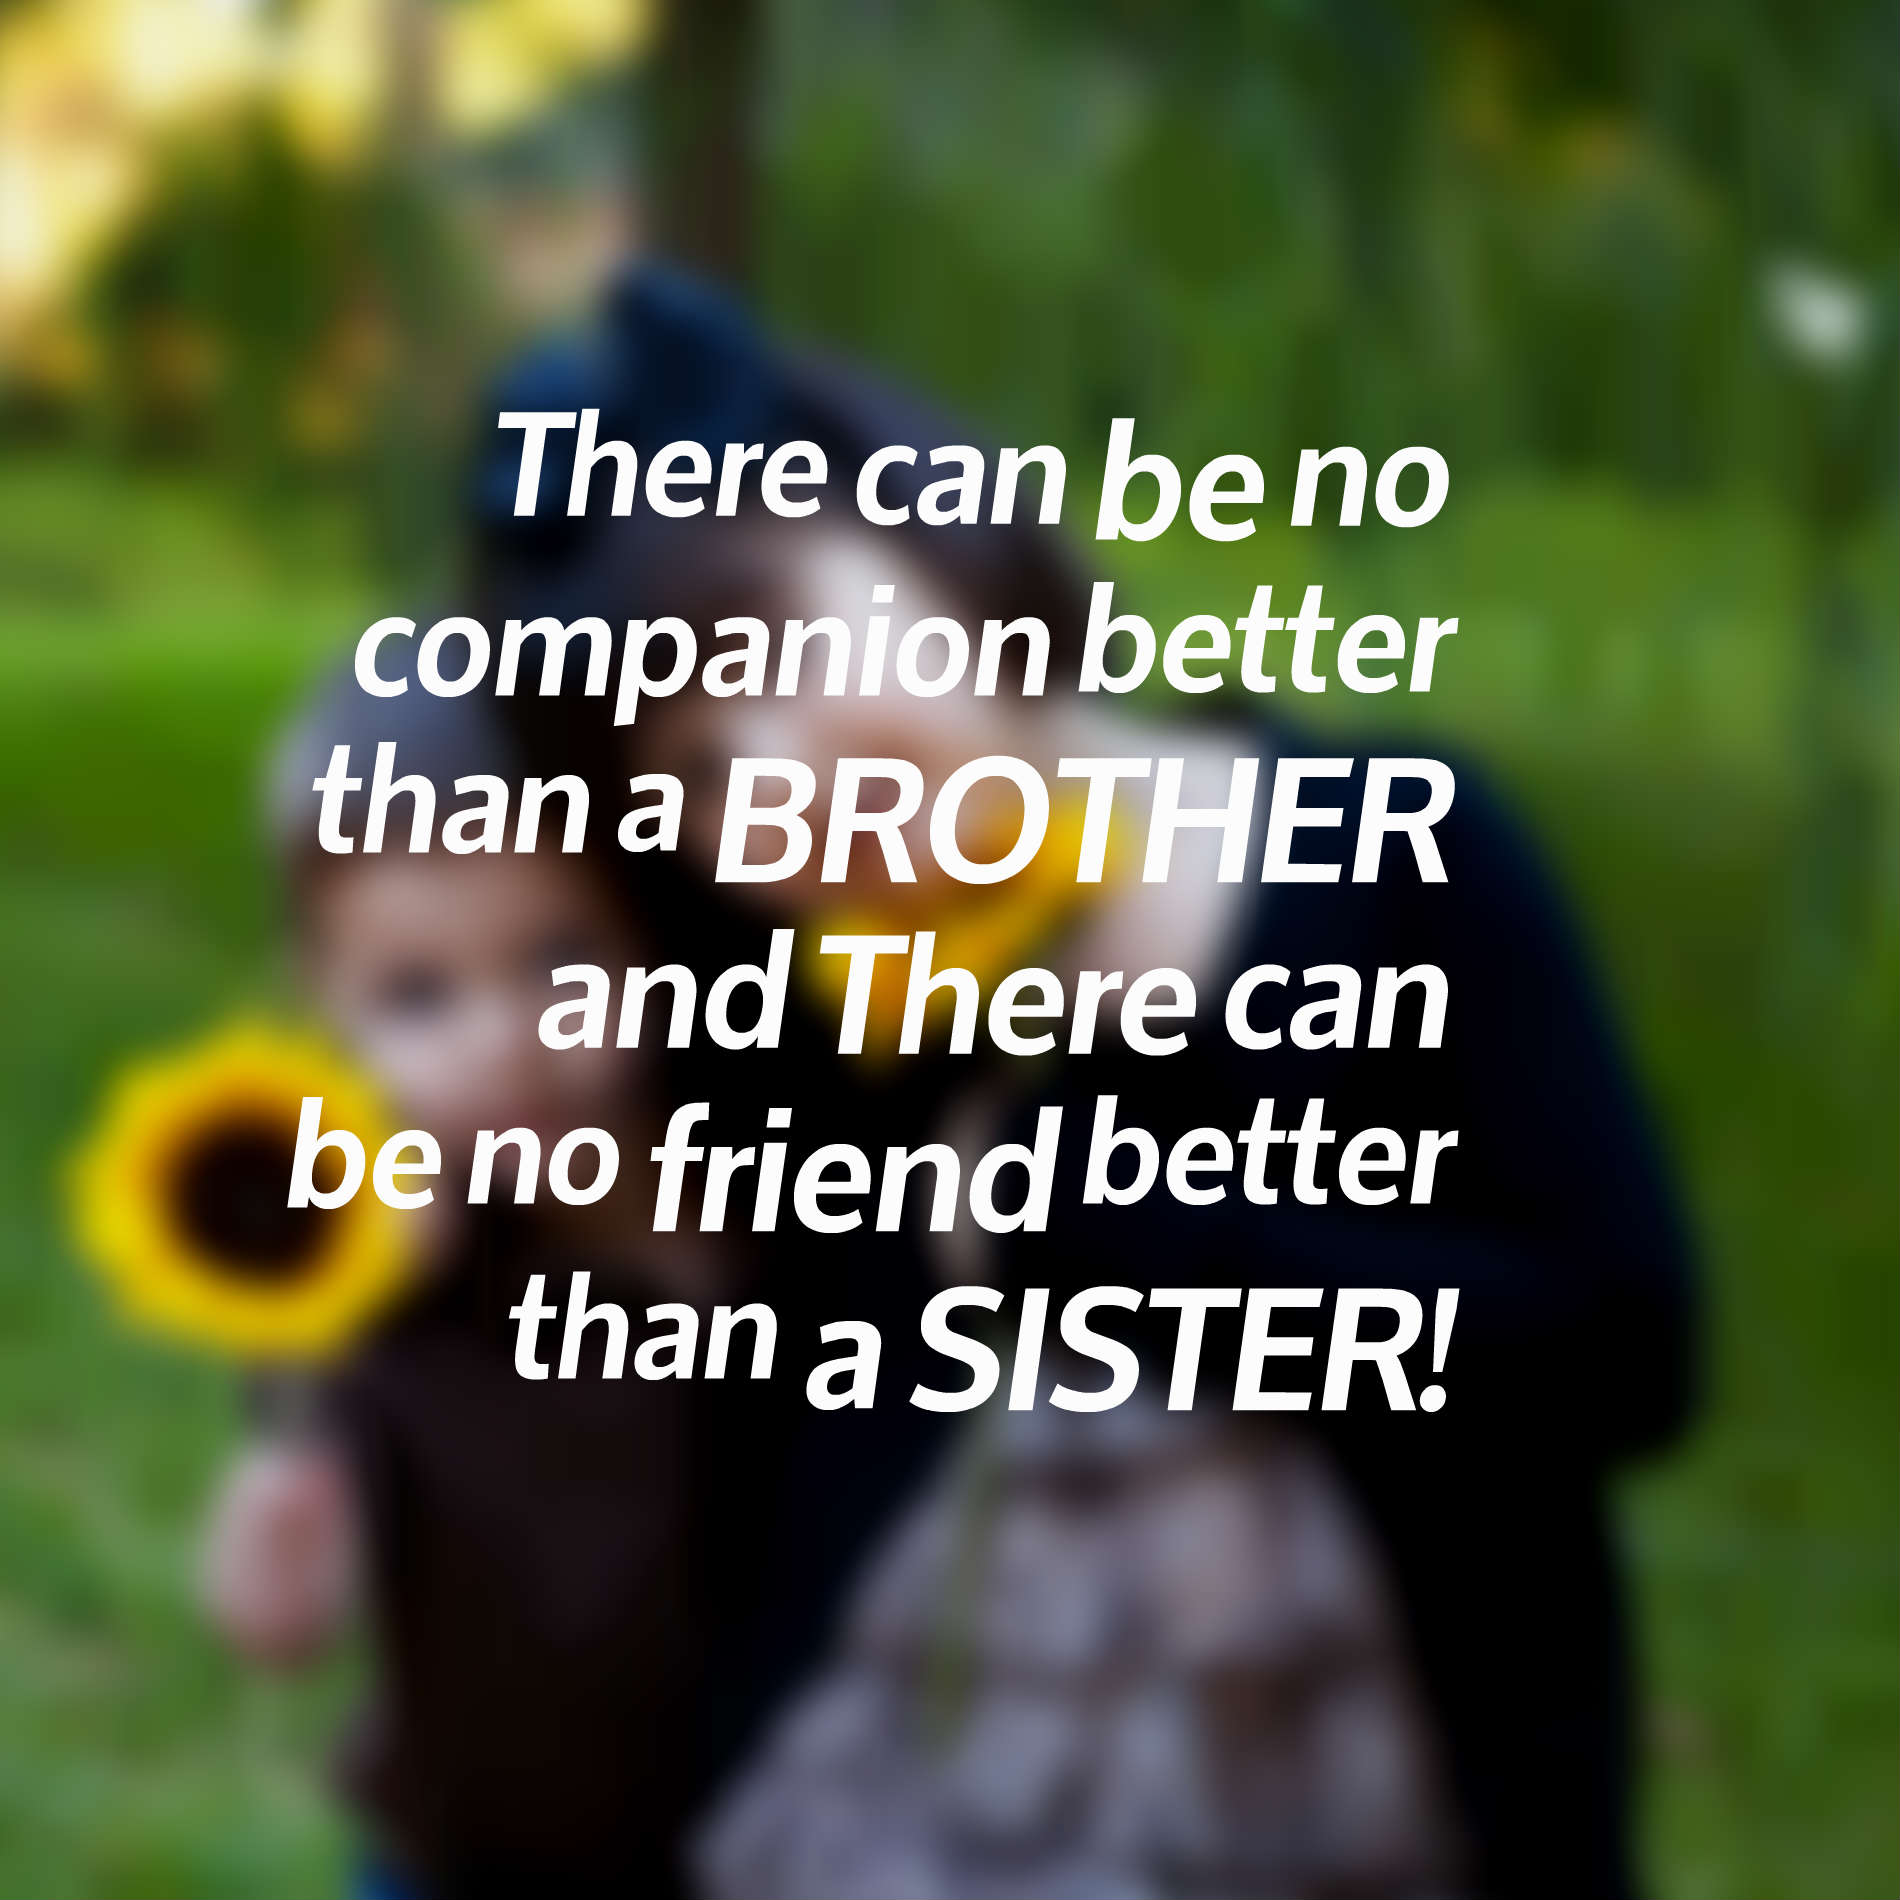 There can be no companion better than a BROTHER and There can be no friend better than a SISTER!